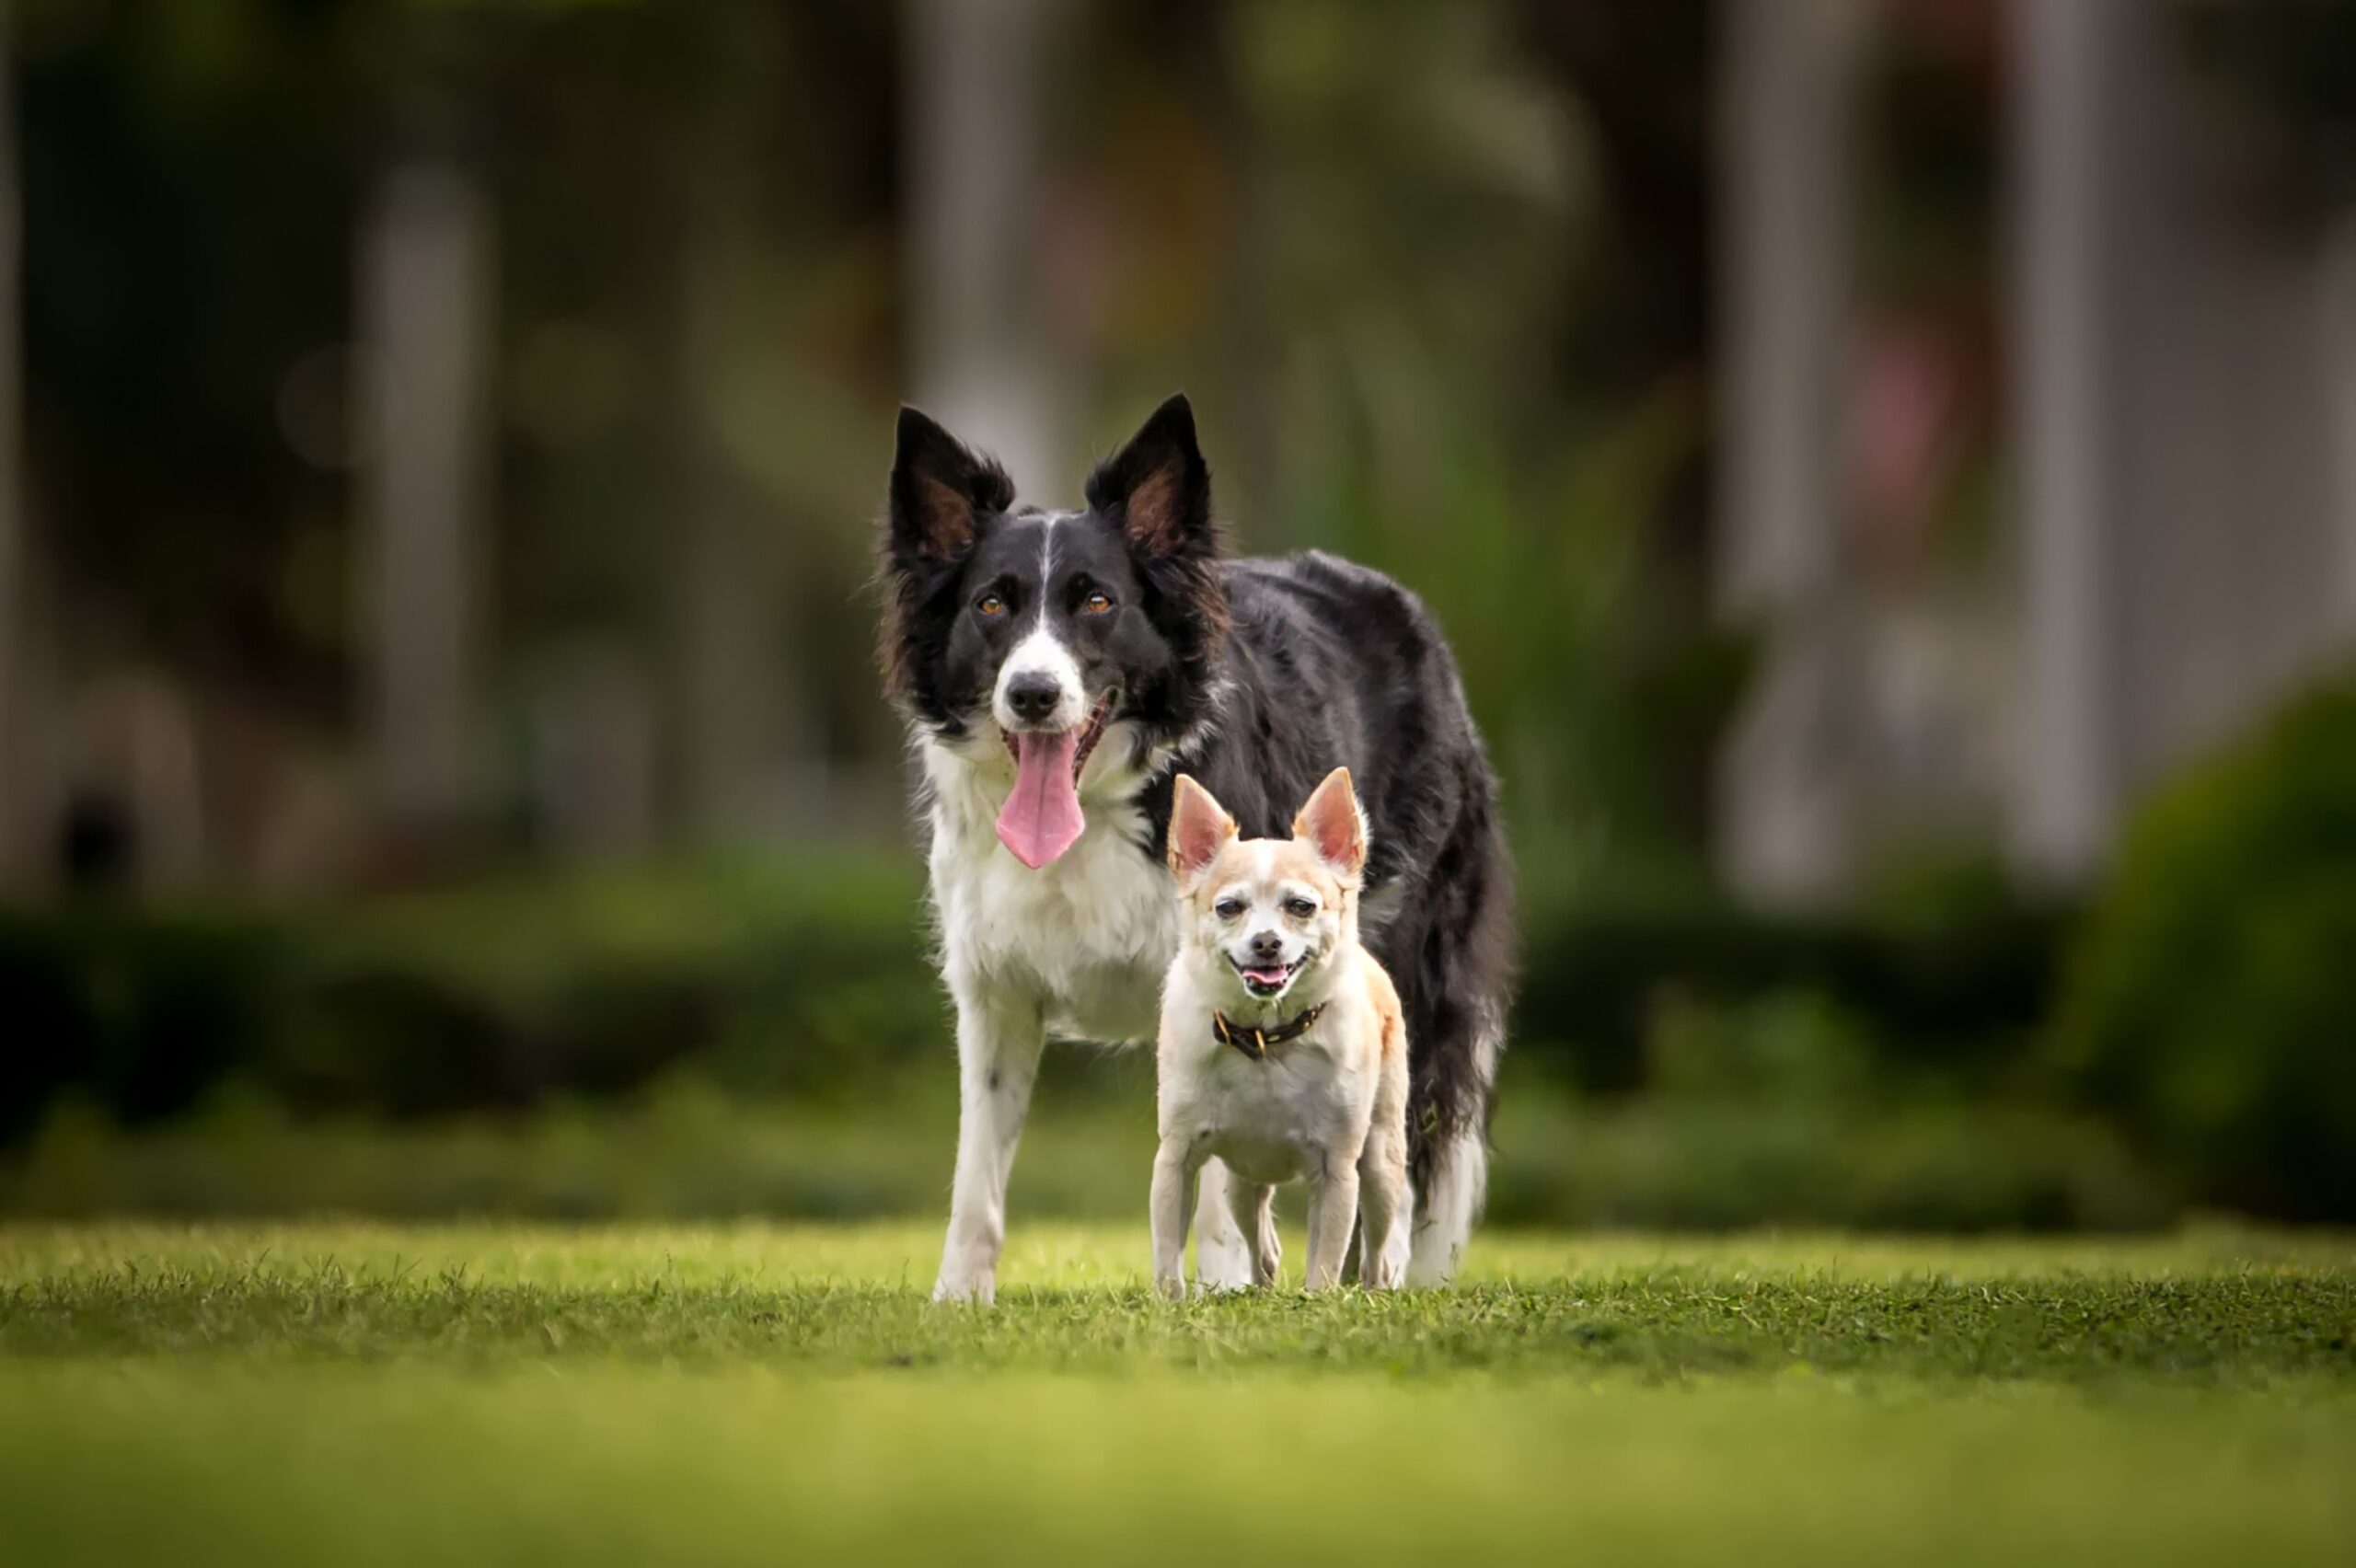 How to Determine Compatibility of a Second Dog-WildCreaturey